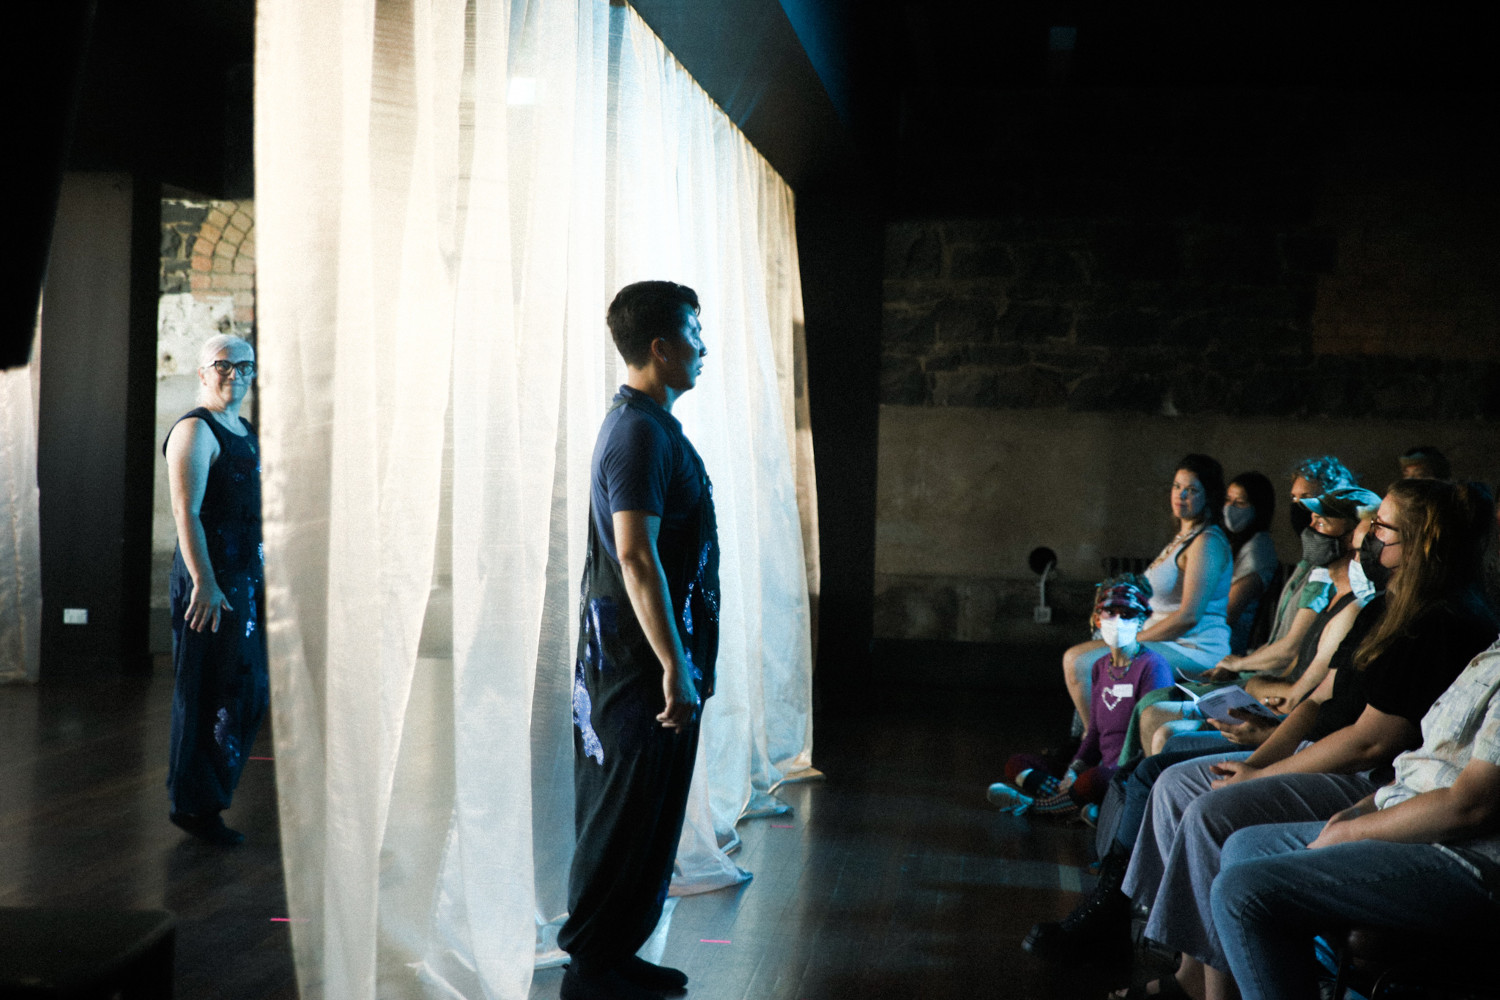 A person standing in front of a curtain facing an audience, with another person hidden behind the curtain